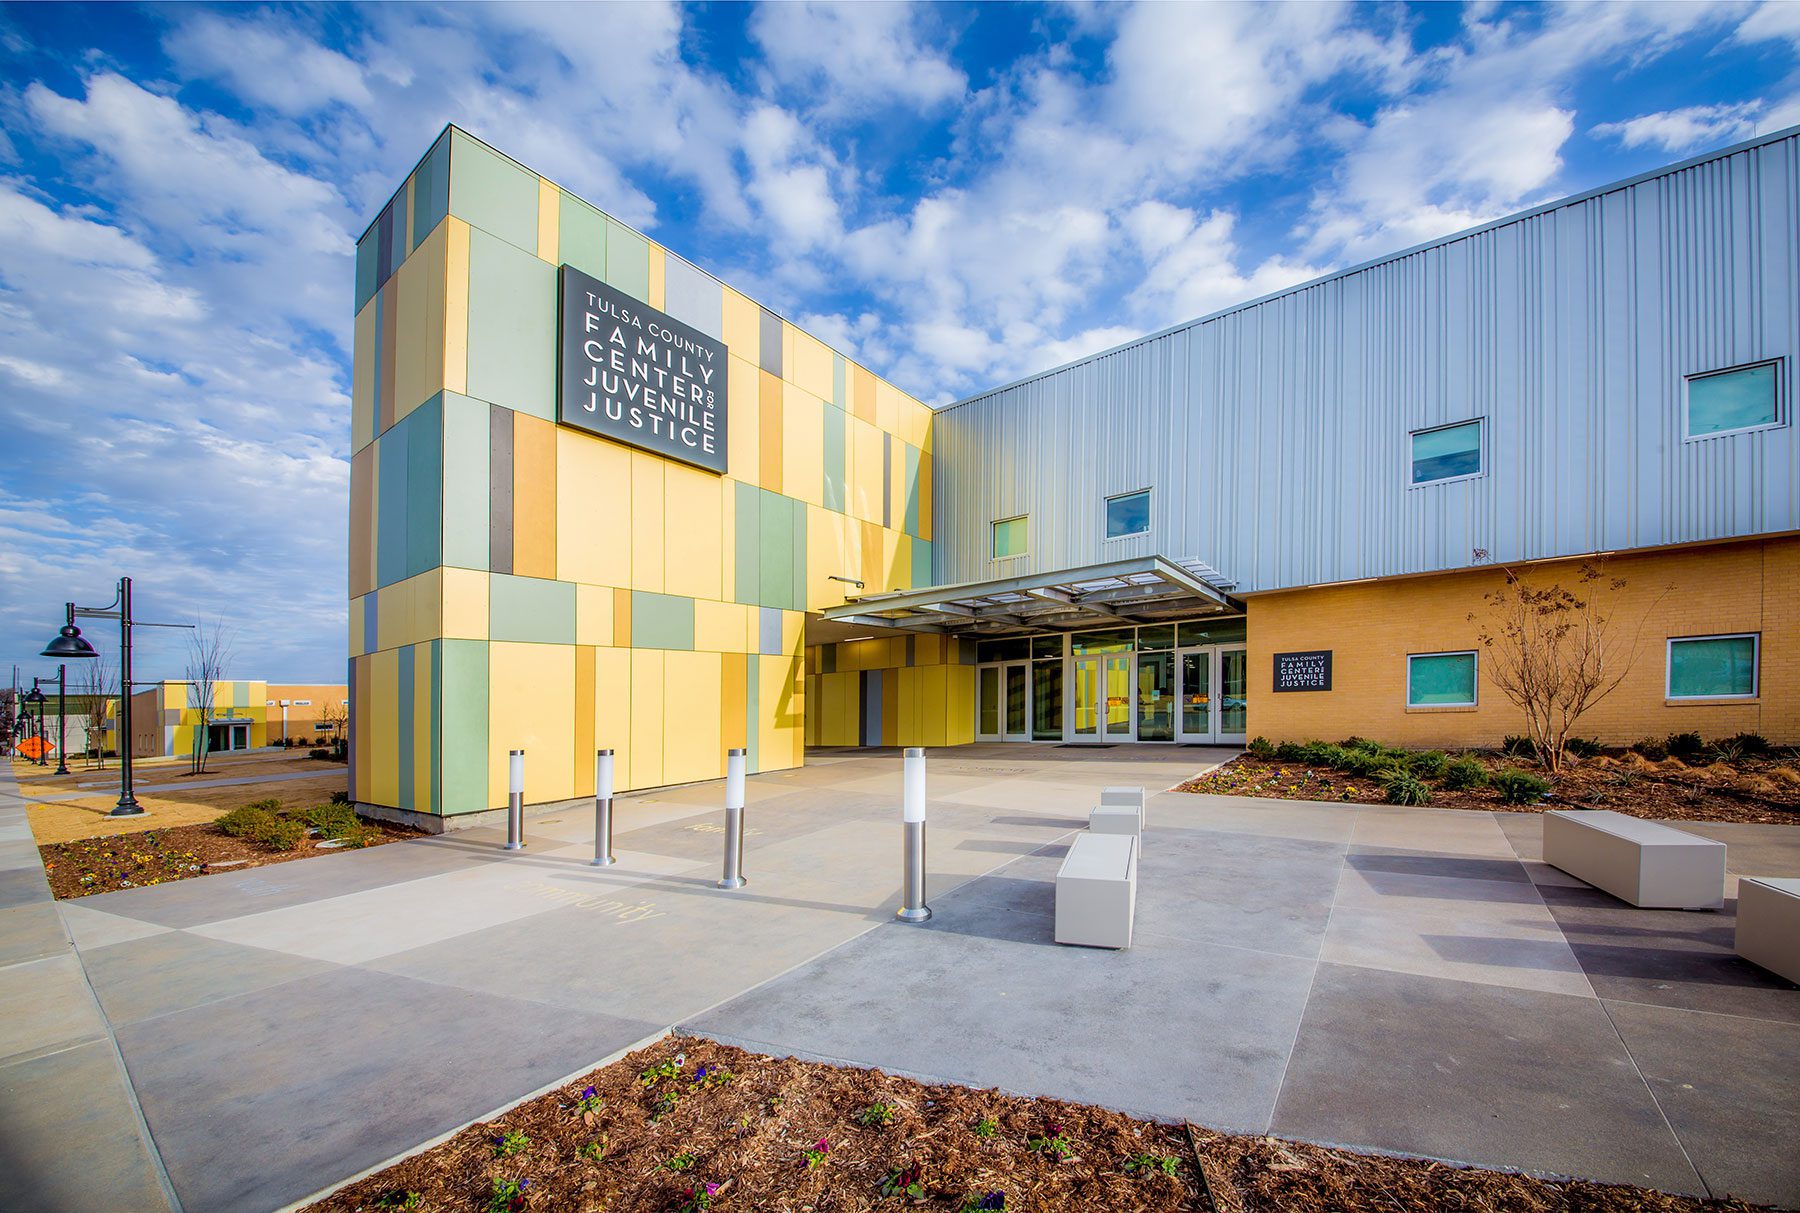 Exterior of the Tulsa County Family Center for Juvenile Justice building.